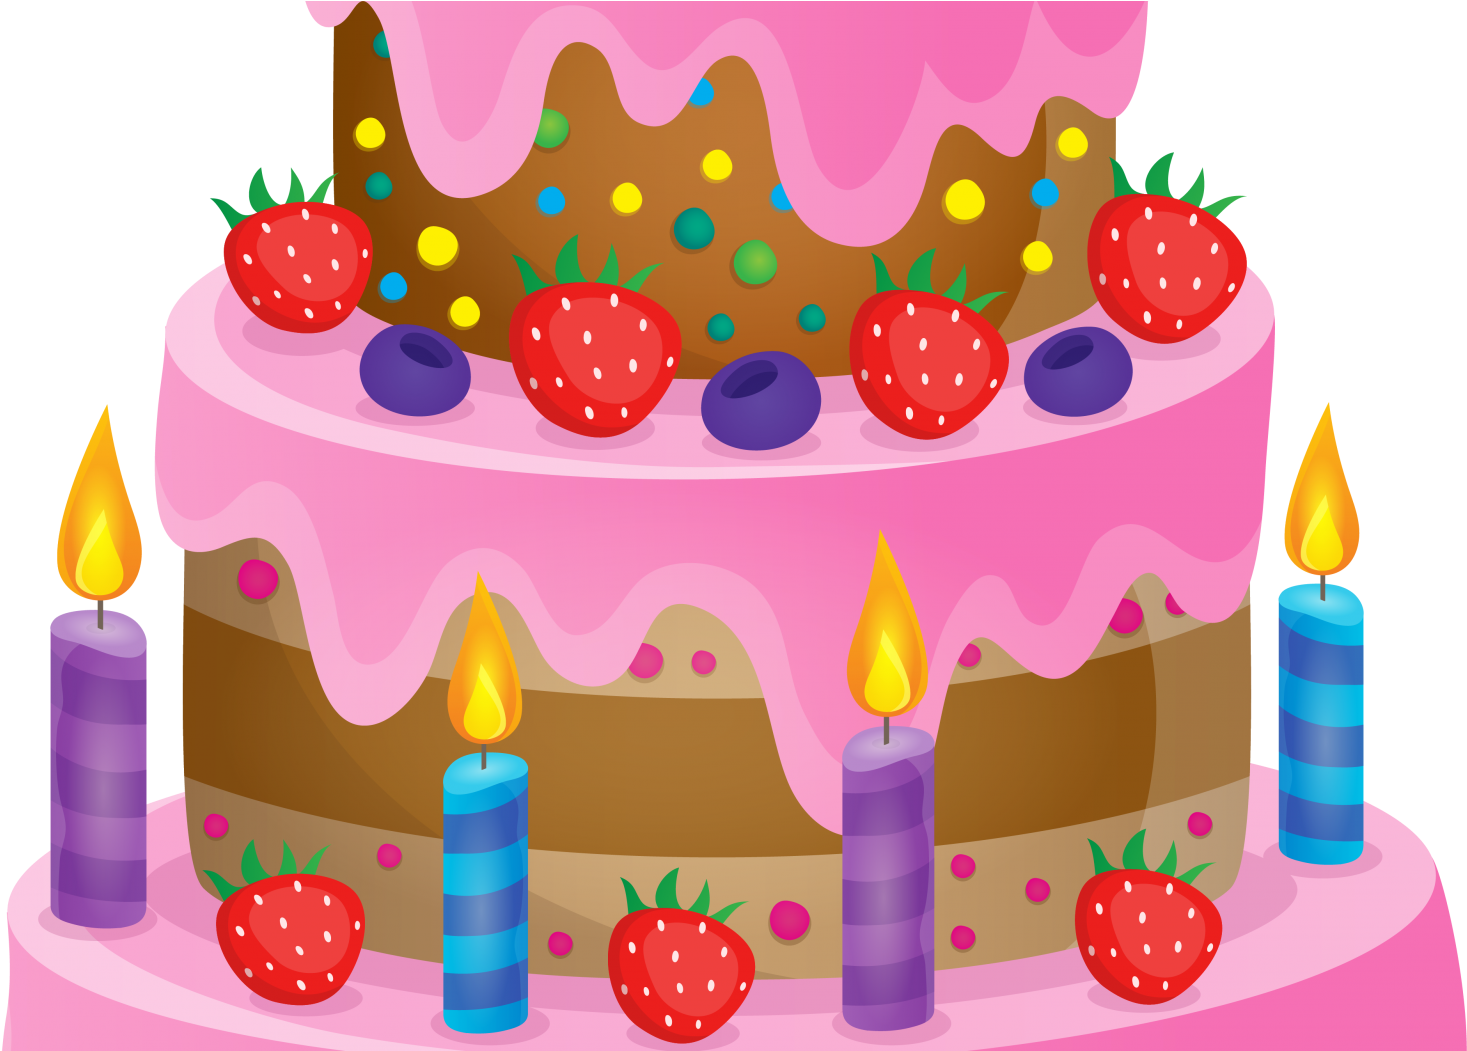 Download 1st Birthday Cake Vector Free Download Techflourish Gros Gateau D Anniversaire Png Image With No Background Pngkey Com